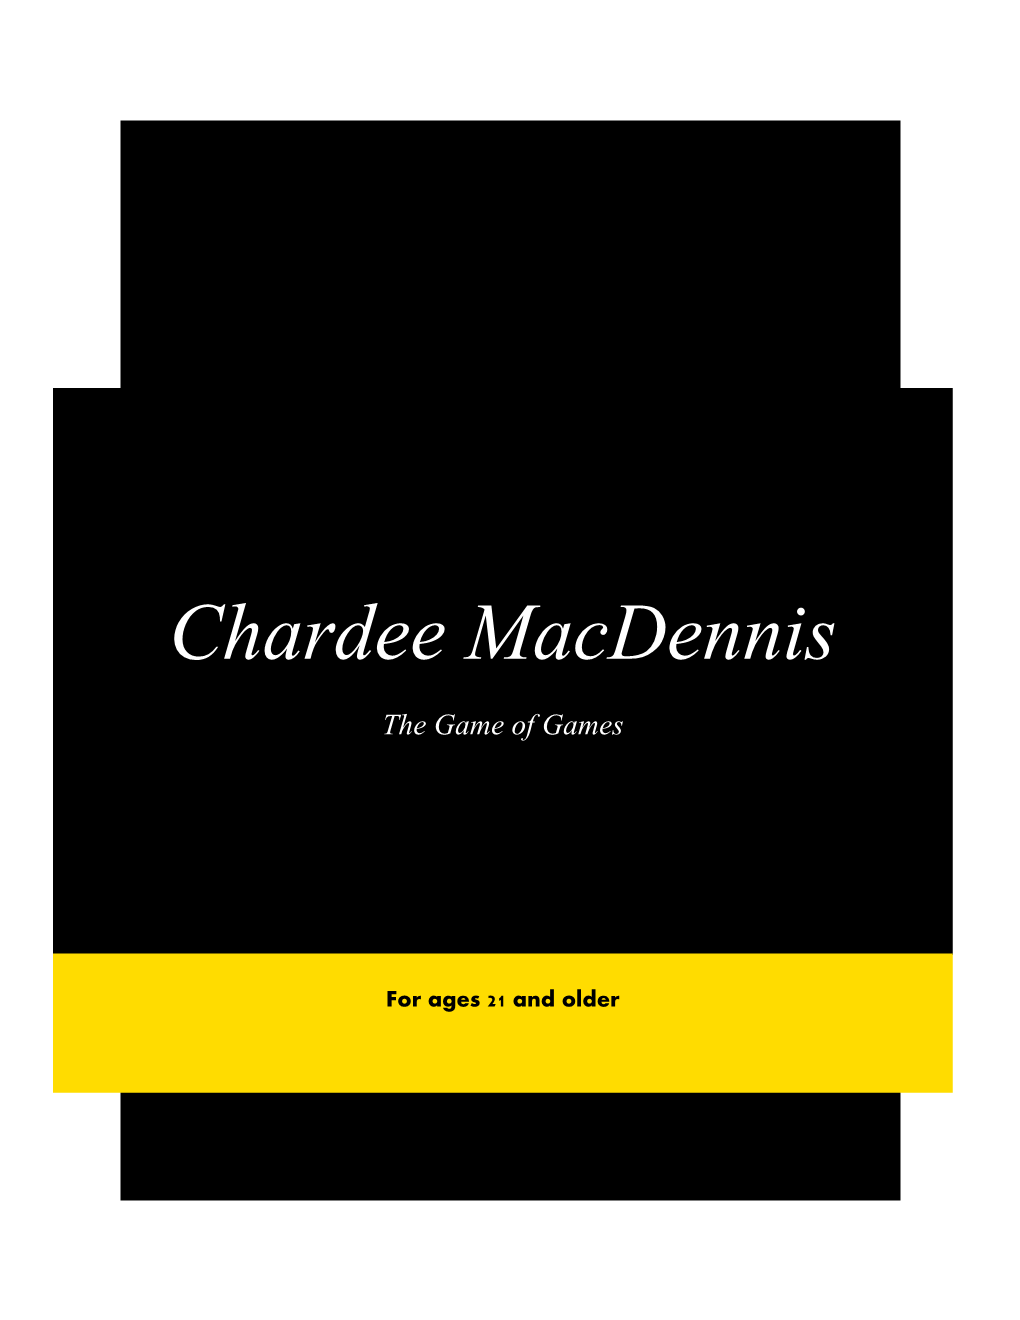 What Is Chardee Macdennis?